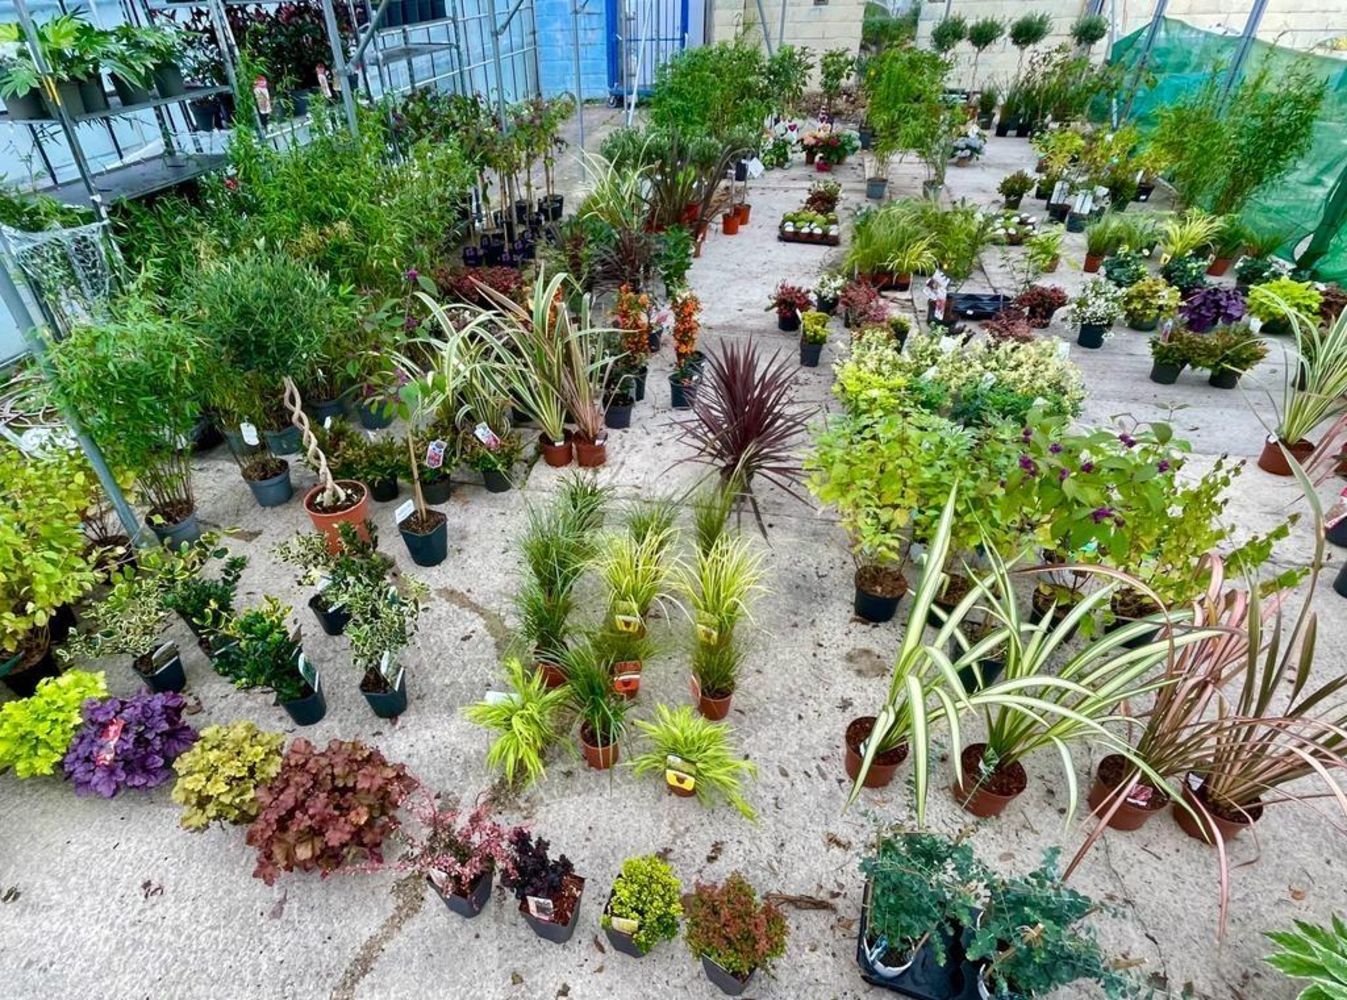 HORTICULTURAL AUCTION - TO INCLUDE CHRISTMAS TREES, WREATHS, PLANTS, FRUIT AND CITRUS TREES, SEASONAL PLANTS AND ACCESSORIES FROM 9.30 AM